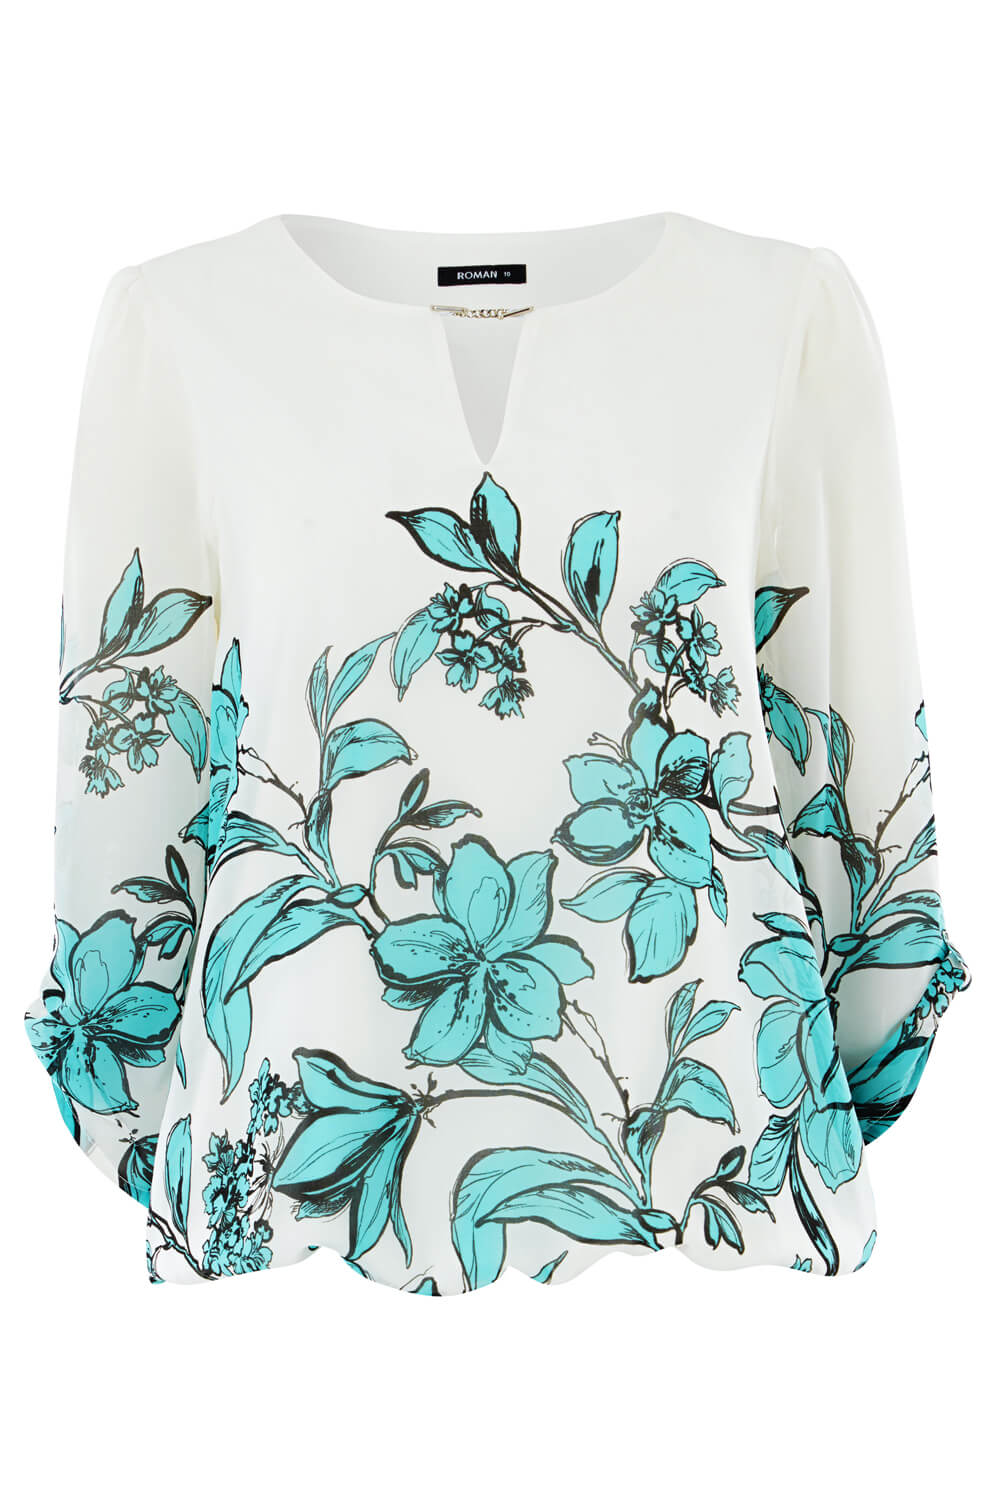 Turquoise Floral Border Print Top, Image 4 of 4